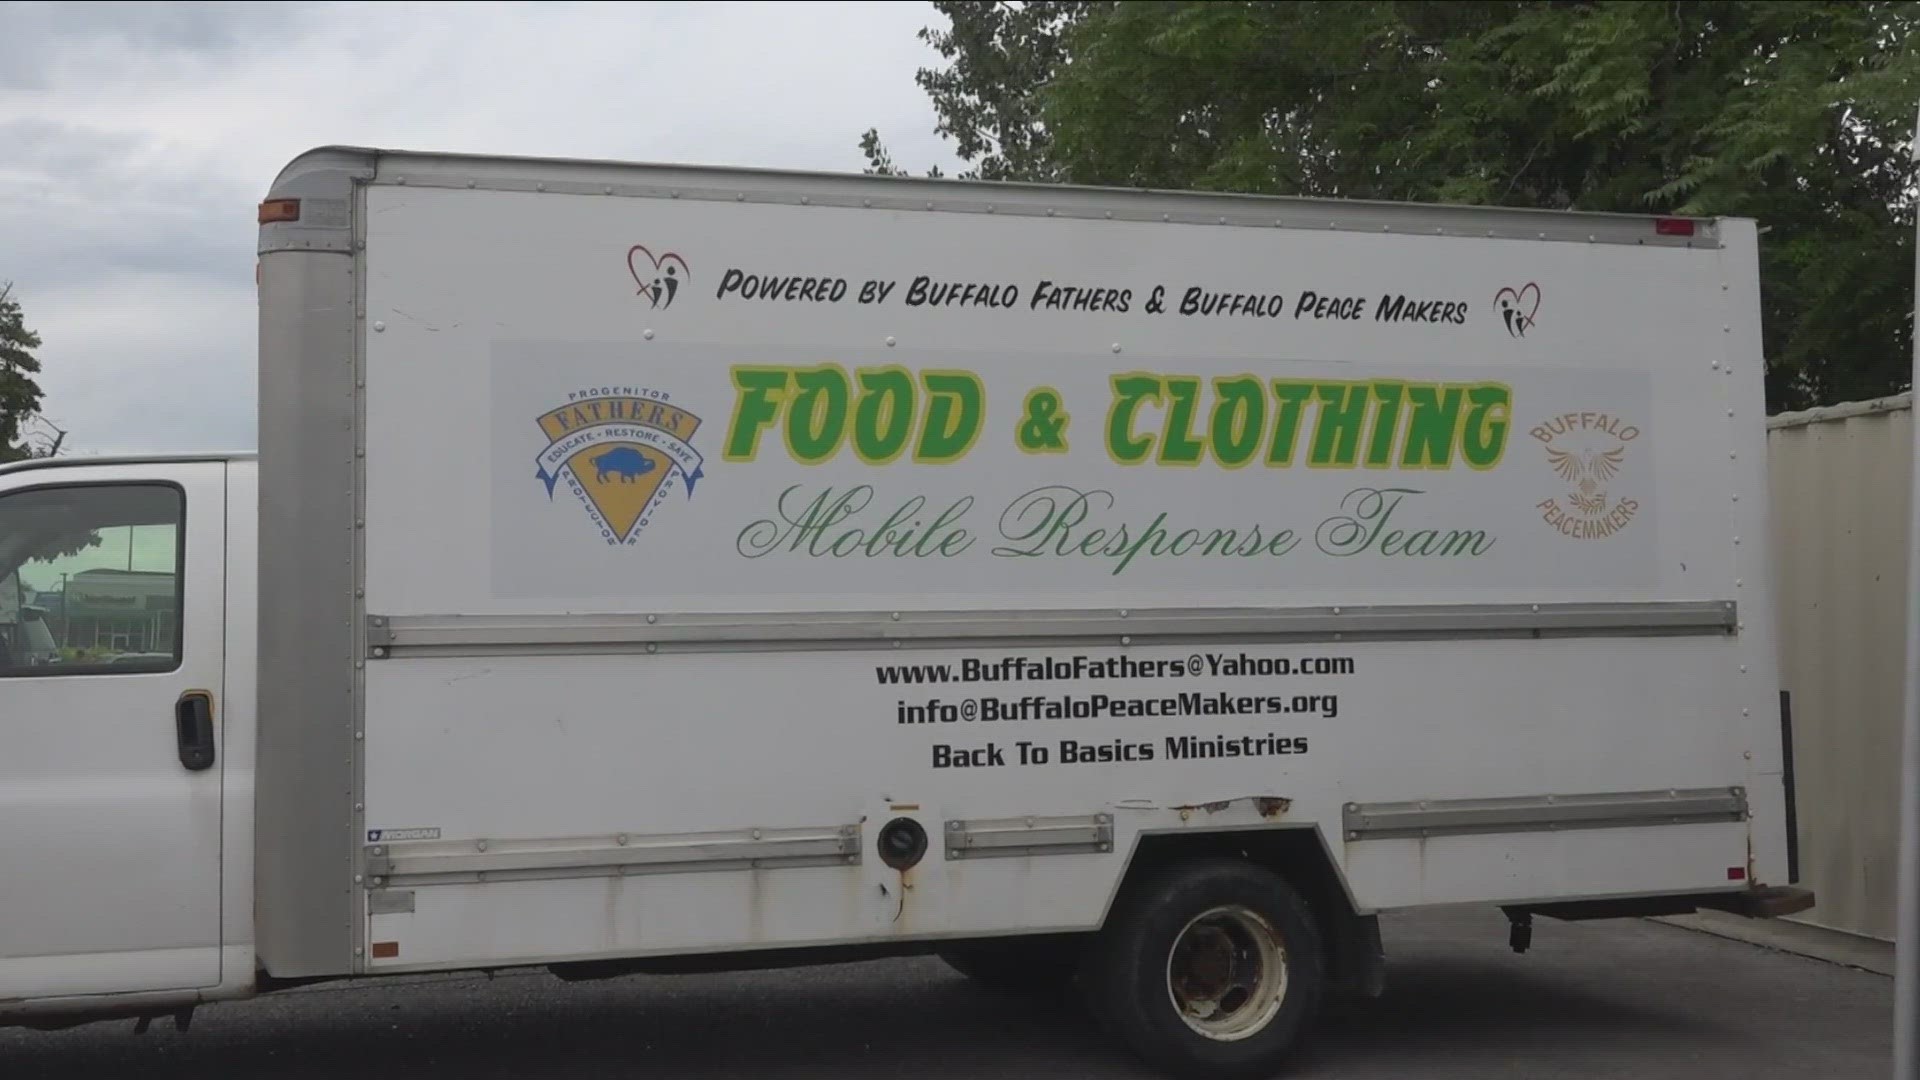 The Hope Christian Center partnered up with Buffalo Fathers and Buffalo Peacemakers to hand out groceries on Saturday to whoever needed them.